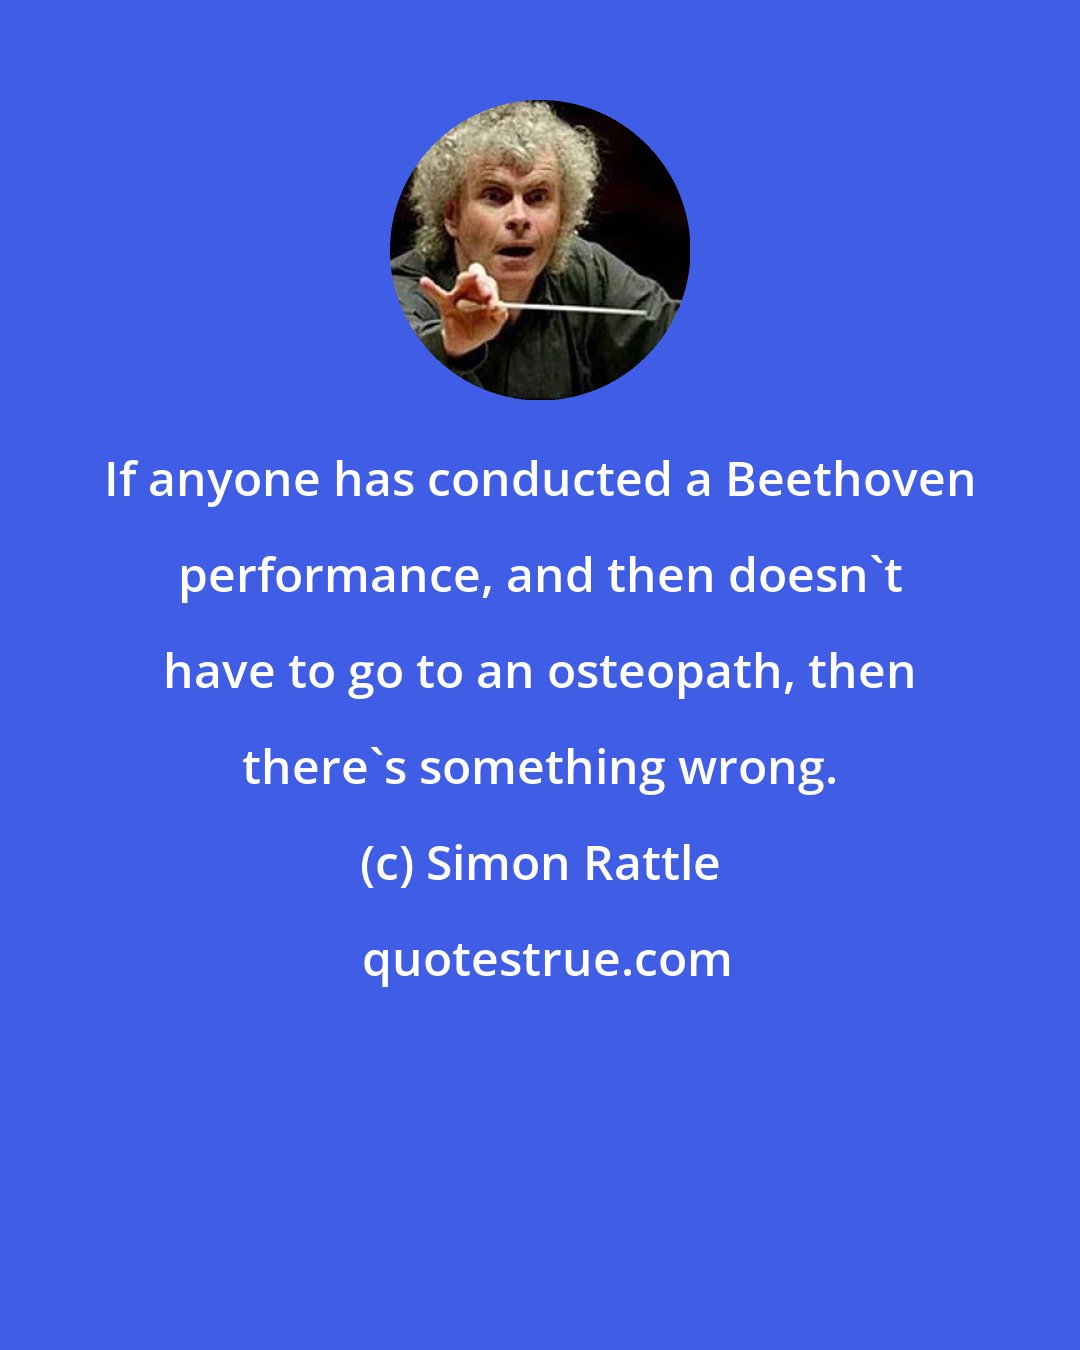 Simon Rattle: If anyone has conducted a Beethoven performance, and then doesn't have to go to an osteopath, then there's something wrong.